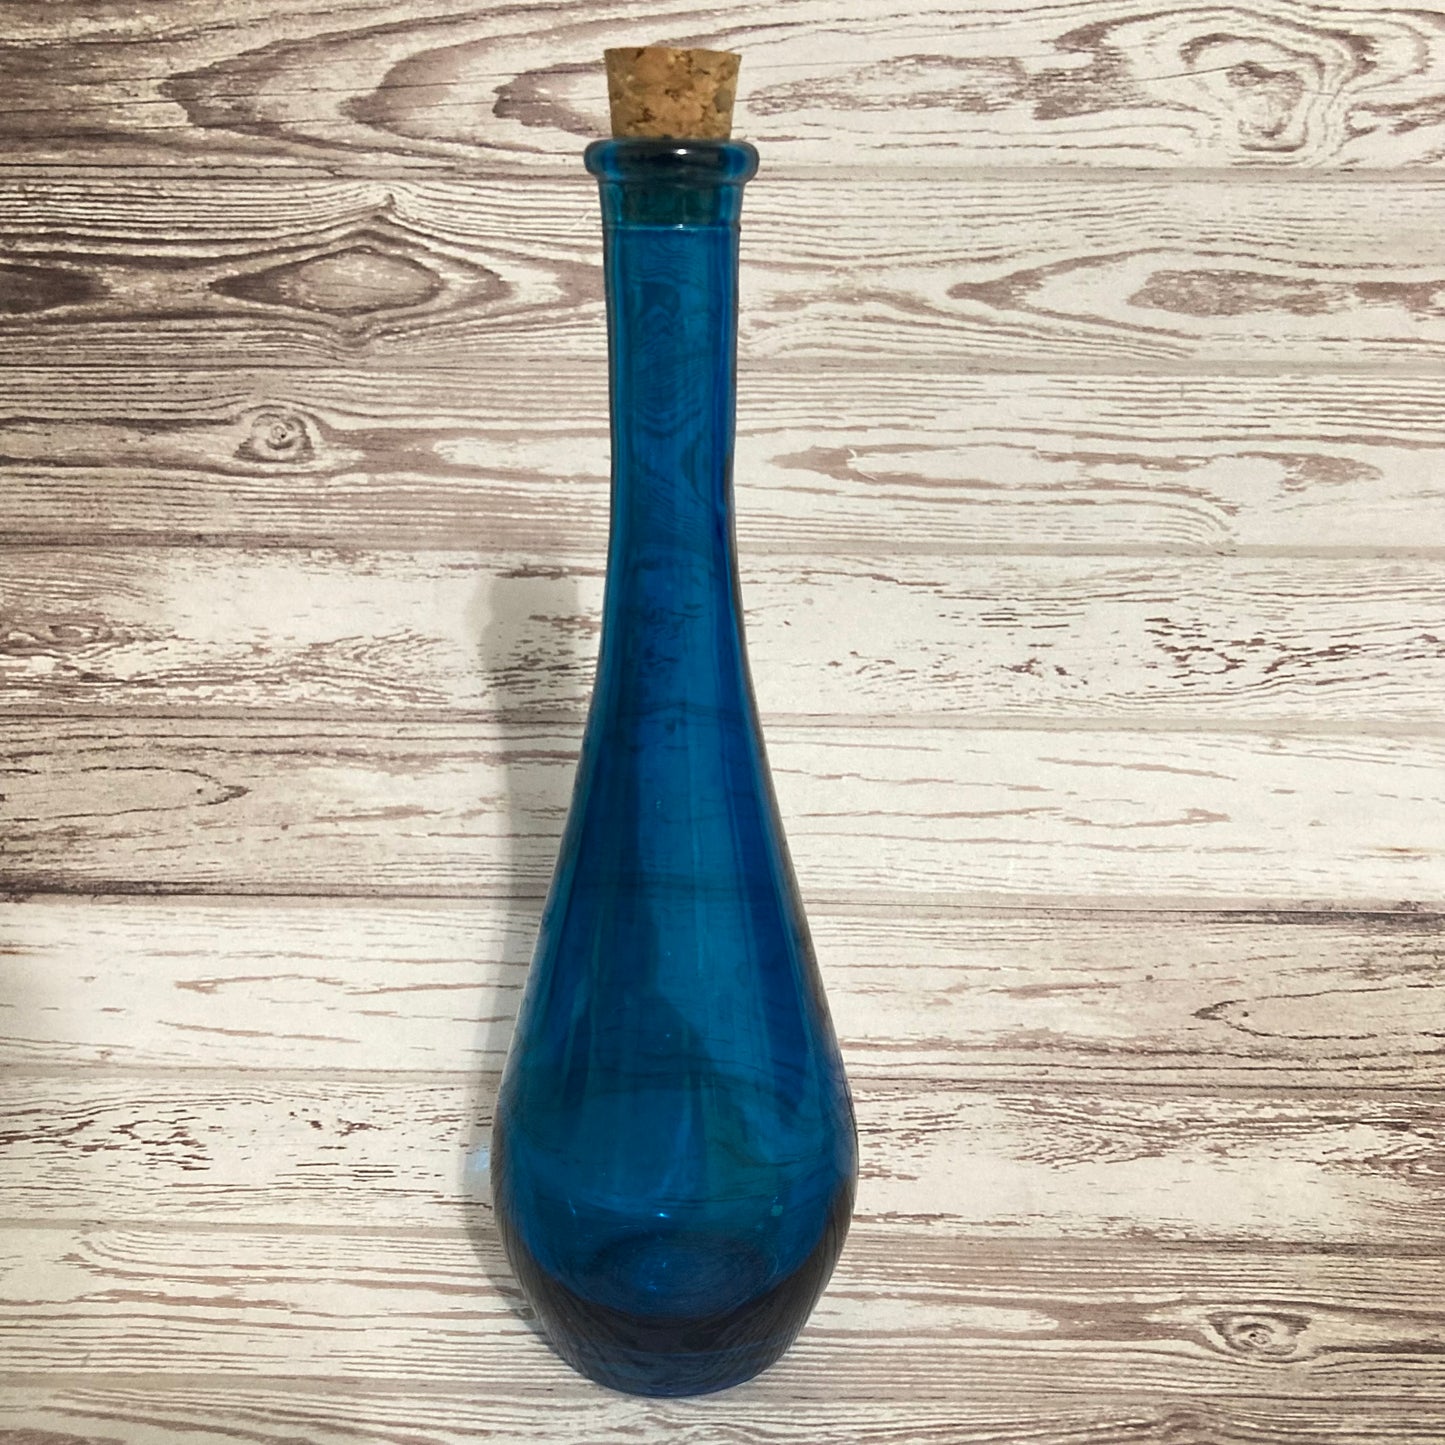 Apothecary Jar - Blue Glass Teardrop Potion Spell Jar with cork top